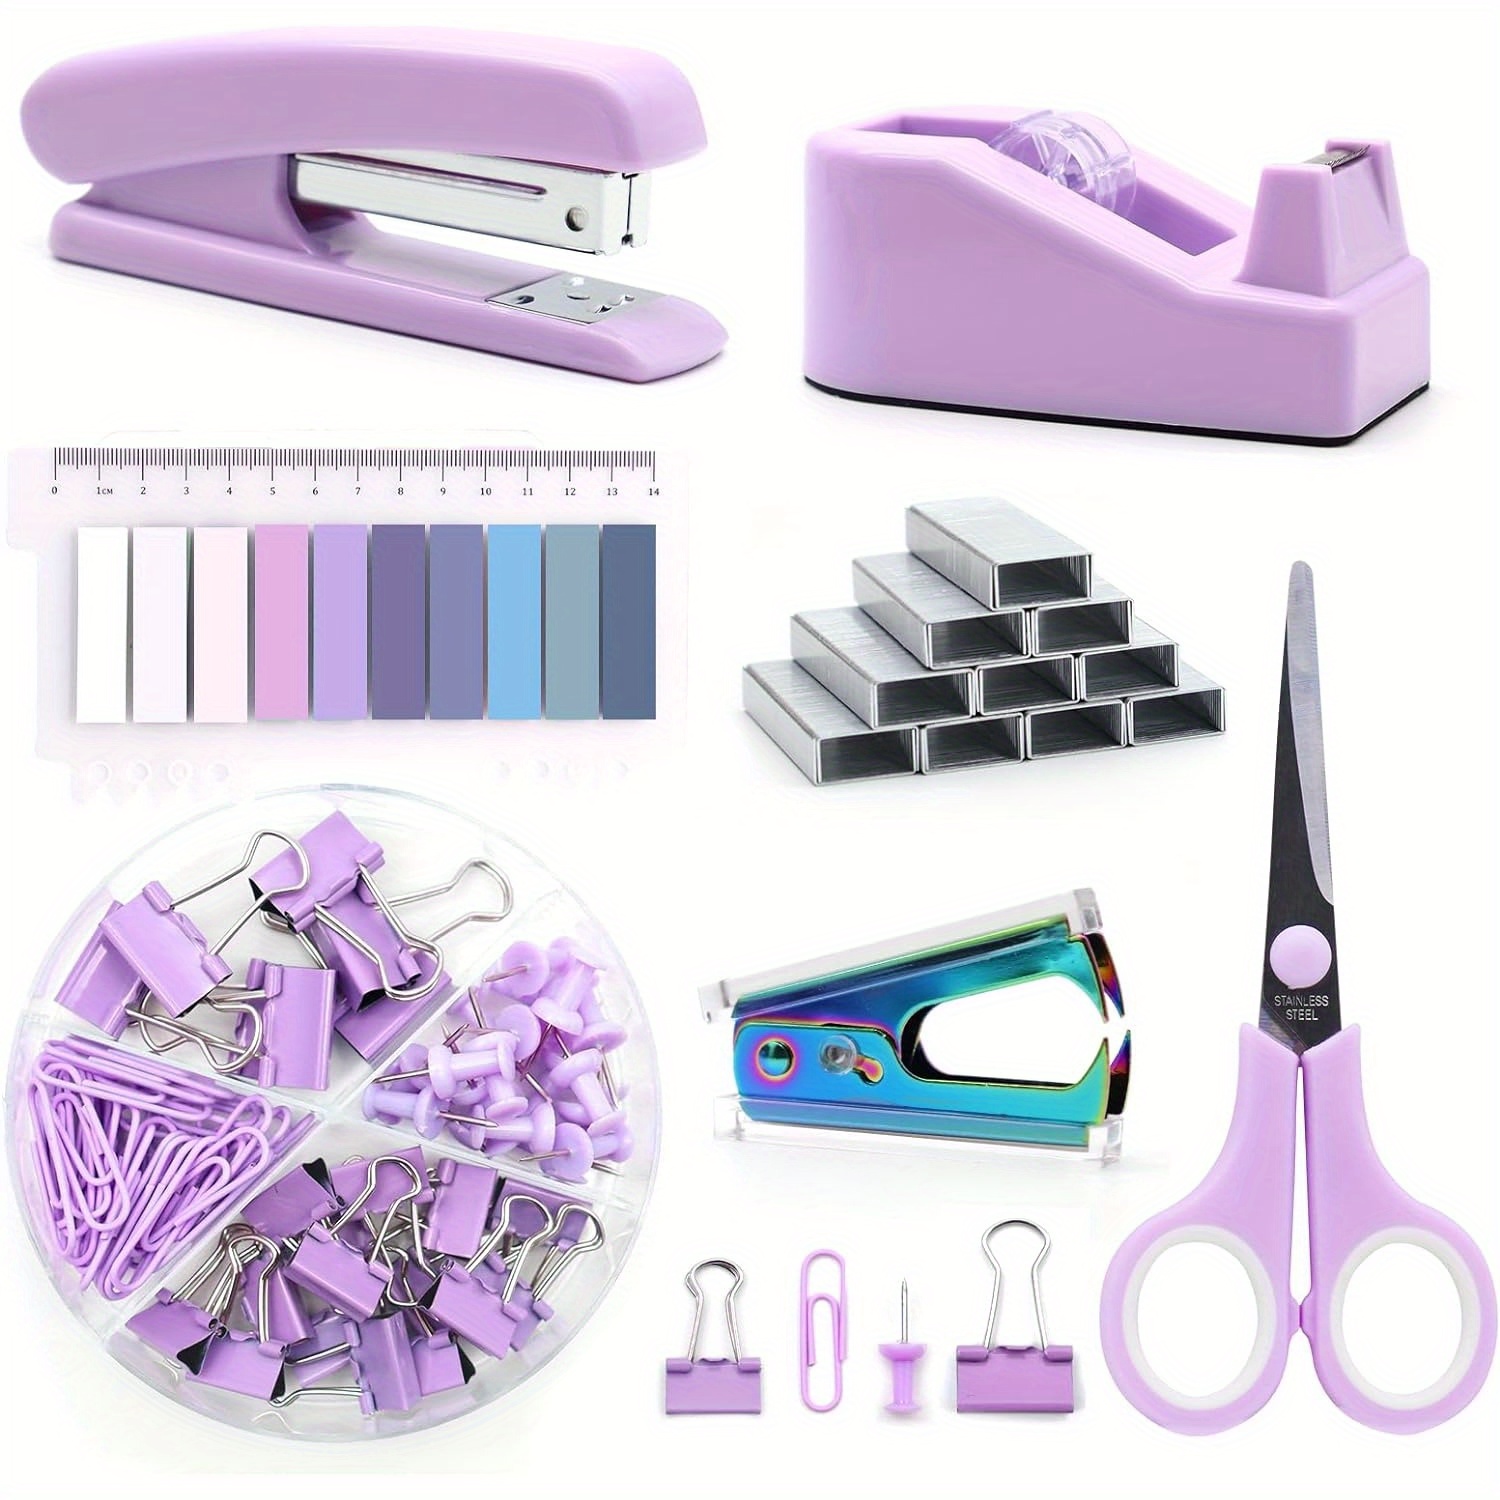 leepiya Office Supply Set 10 Set Pink Desk Accessories Set Include Stapler  Set and Tape Dispenser Lndex Tabs Staple Remover Hole Punch Scissor and